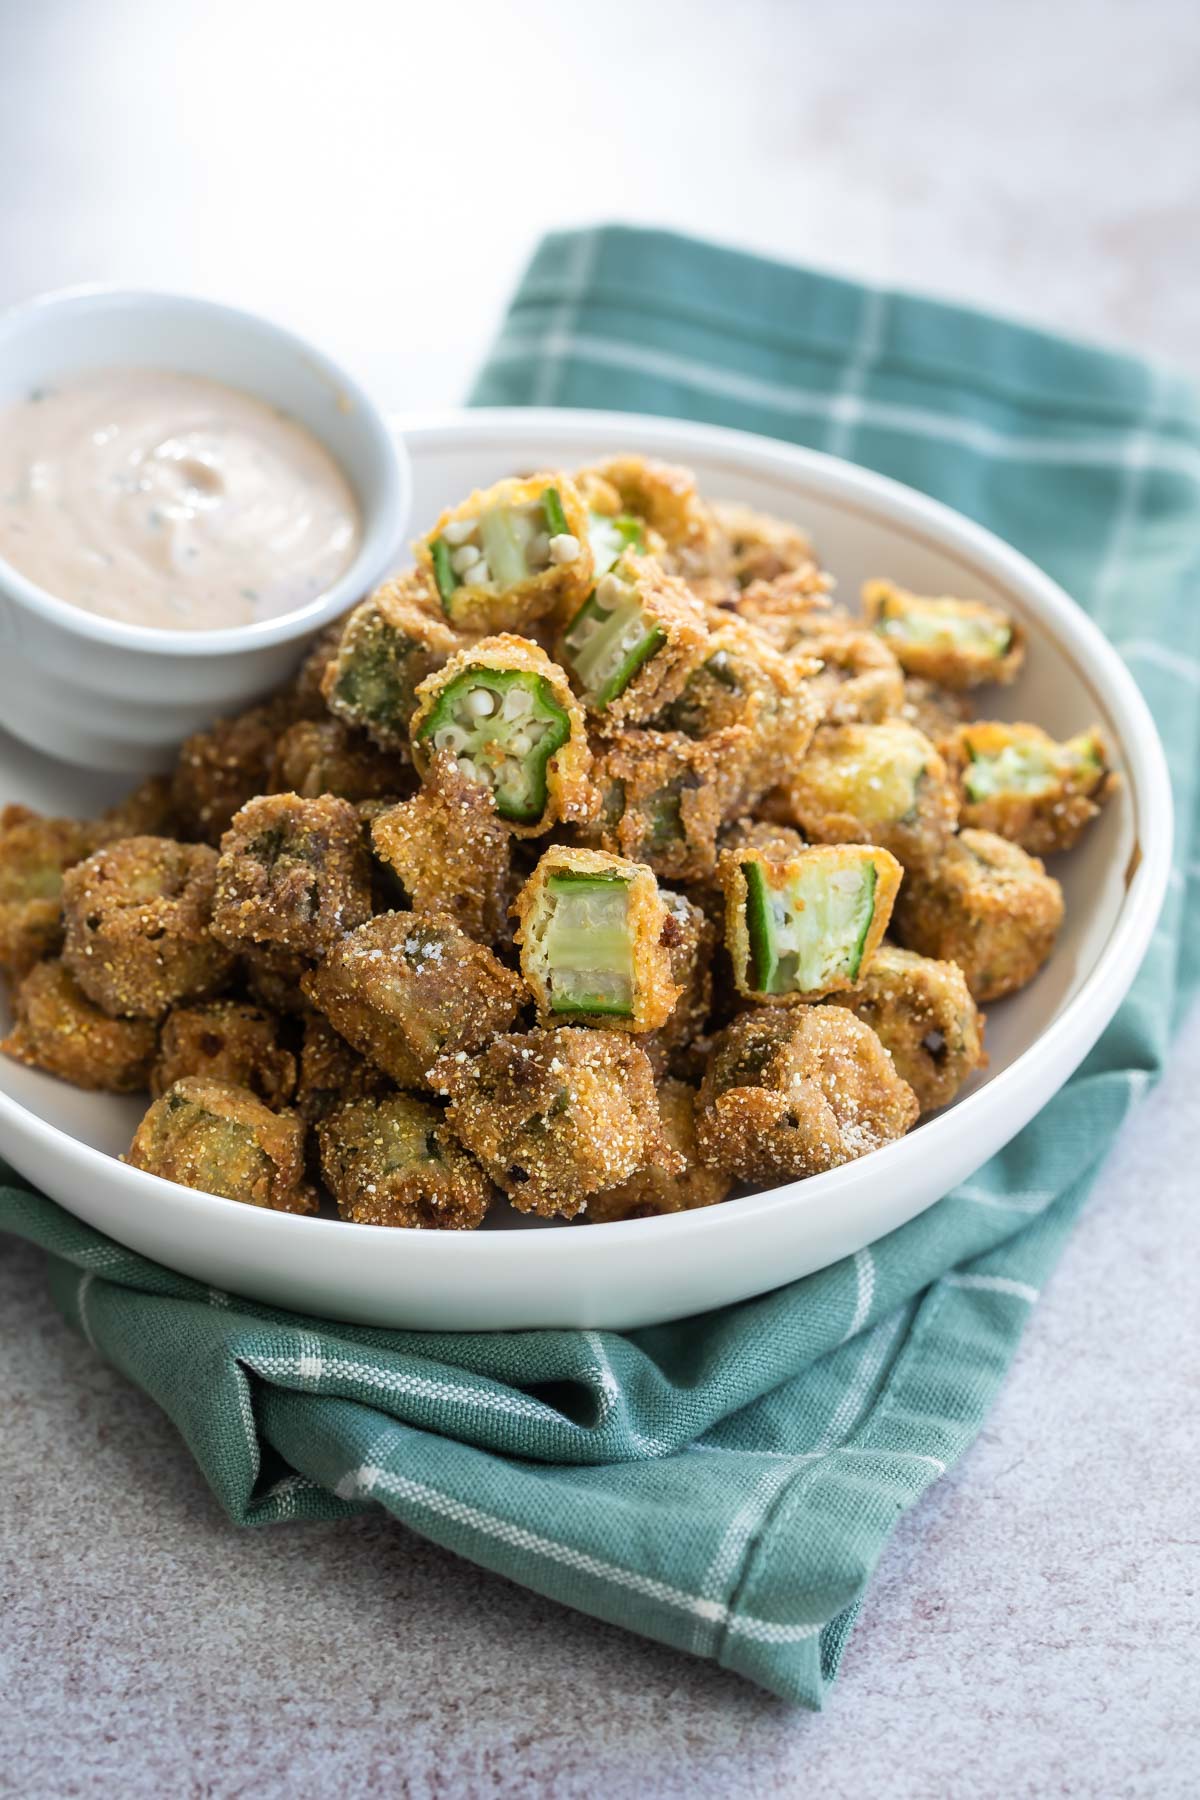 A bowl of fried okra with remoulade sauce on the side.